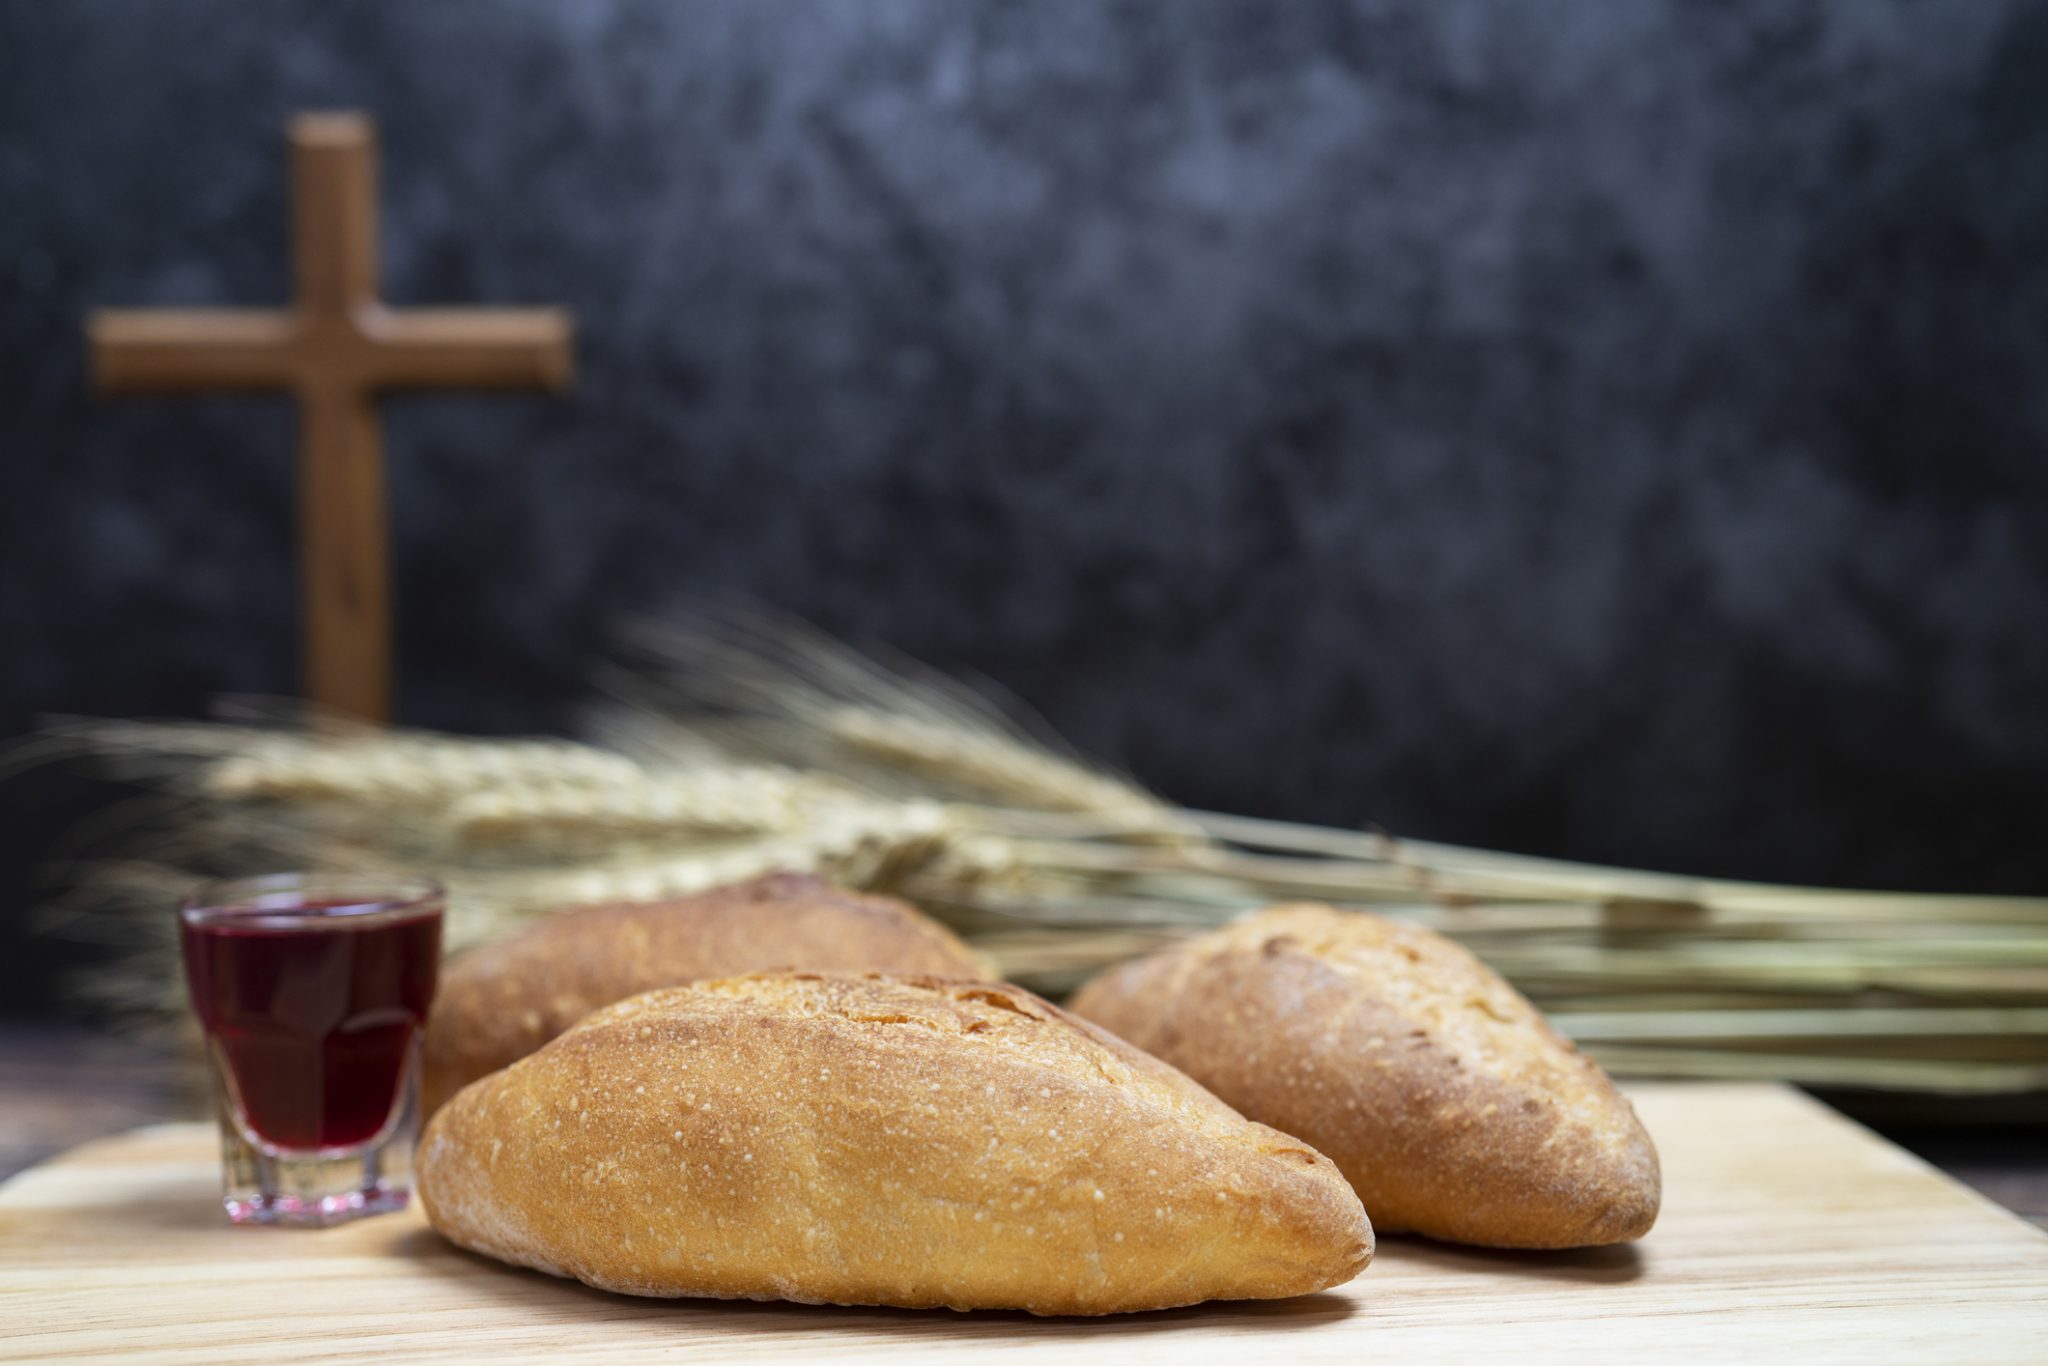 What do priests do when preparing Holy Communion?